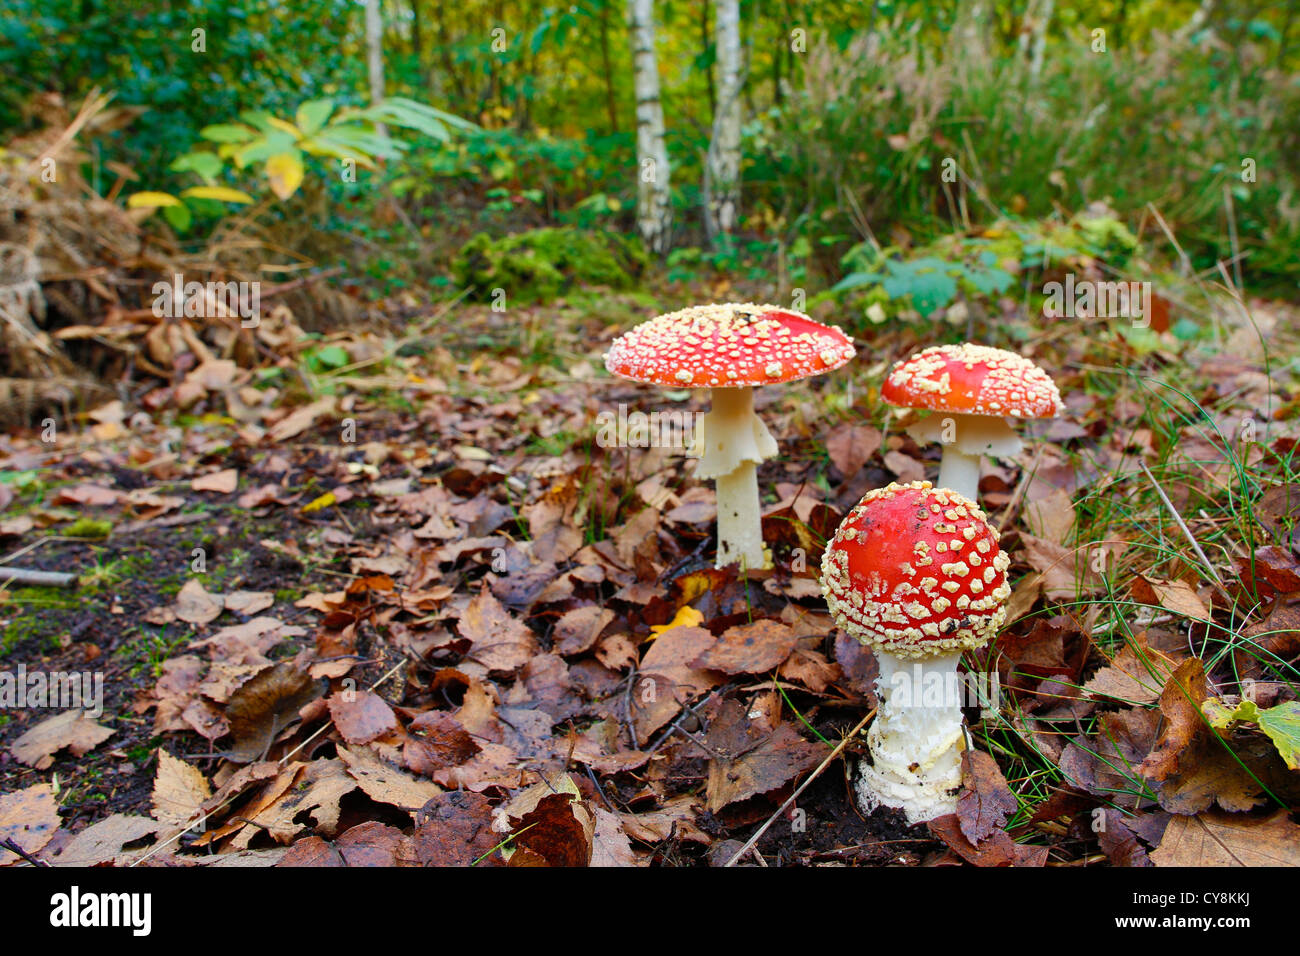 Agaric Fly ; Amanita muscaria ; The Blean Woods ; Kent, UK Banque D'Images